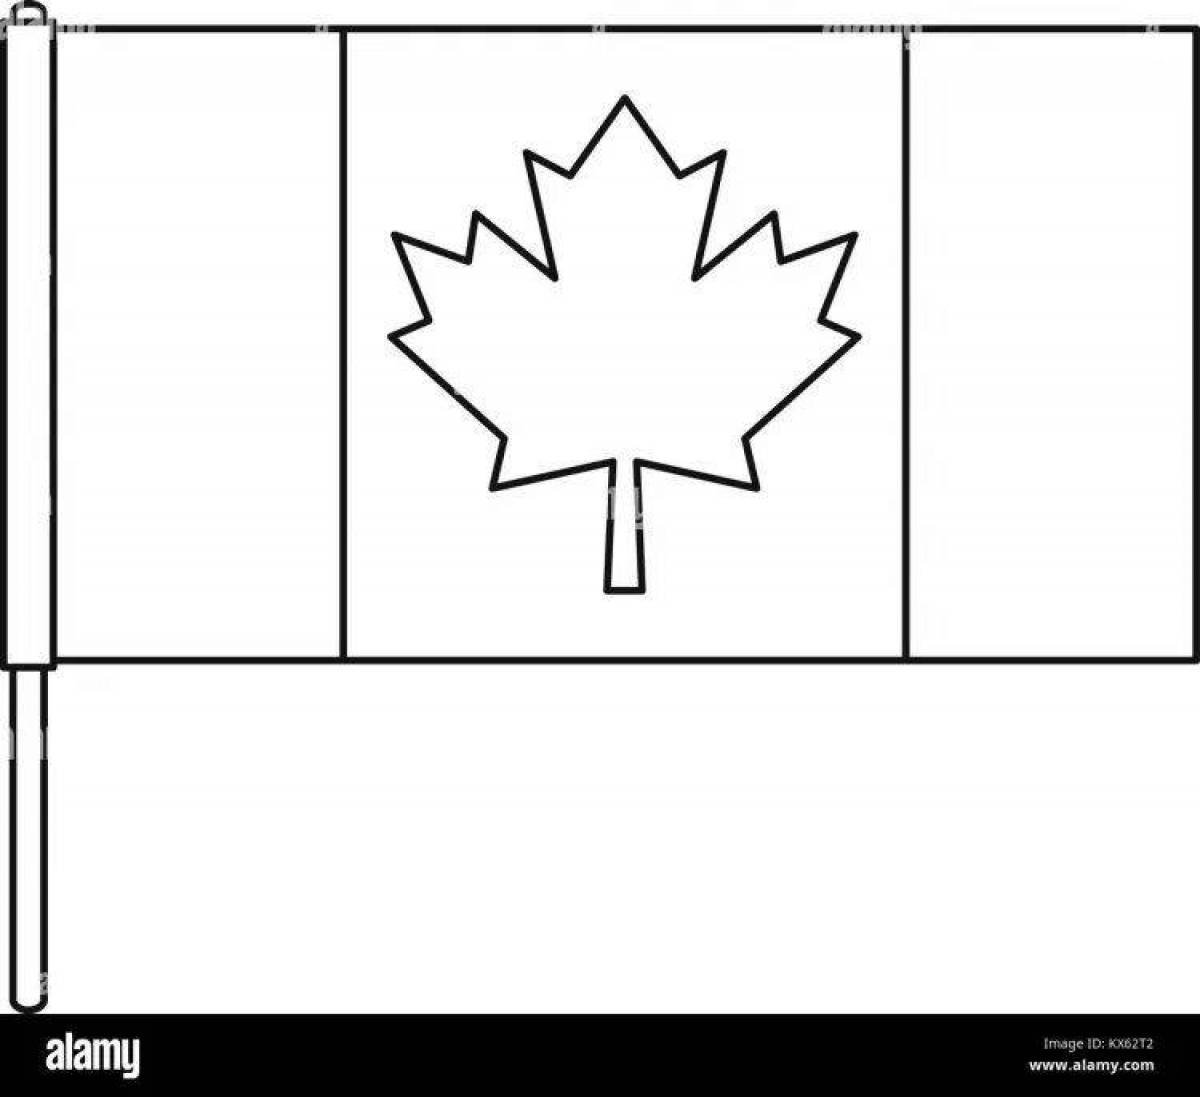 Majestic Canadian flag coloring page